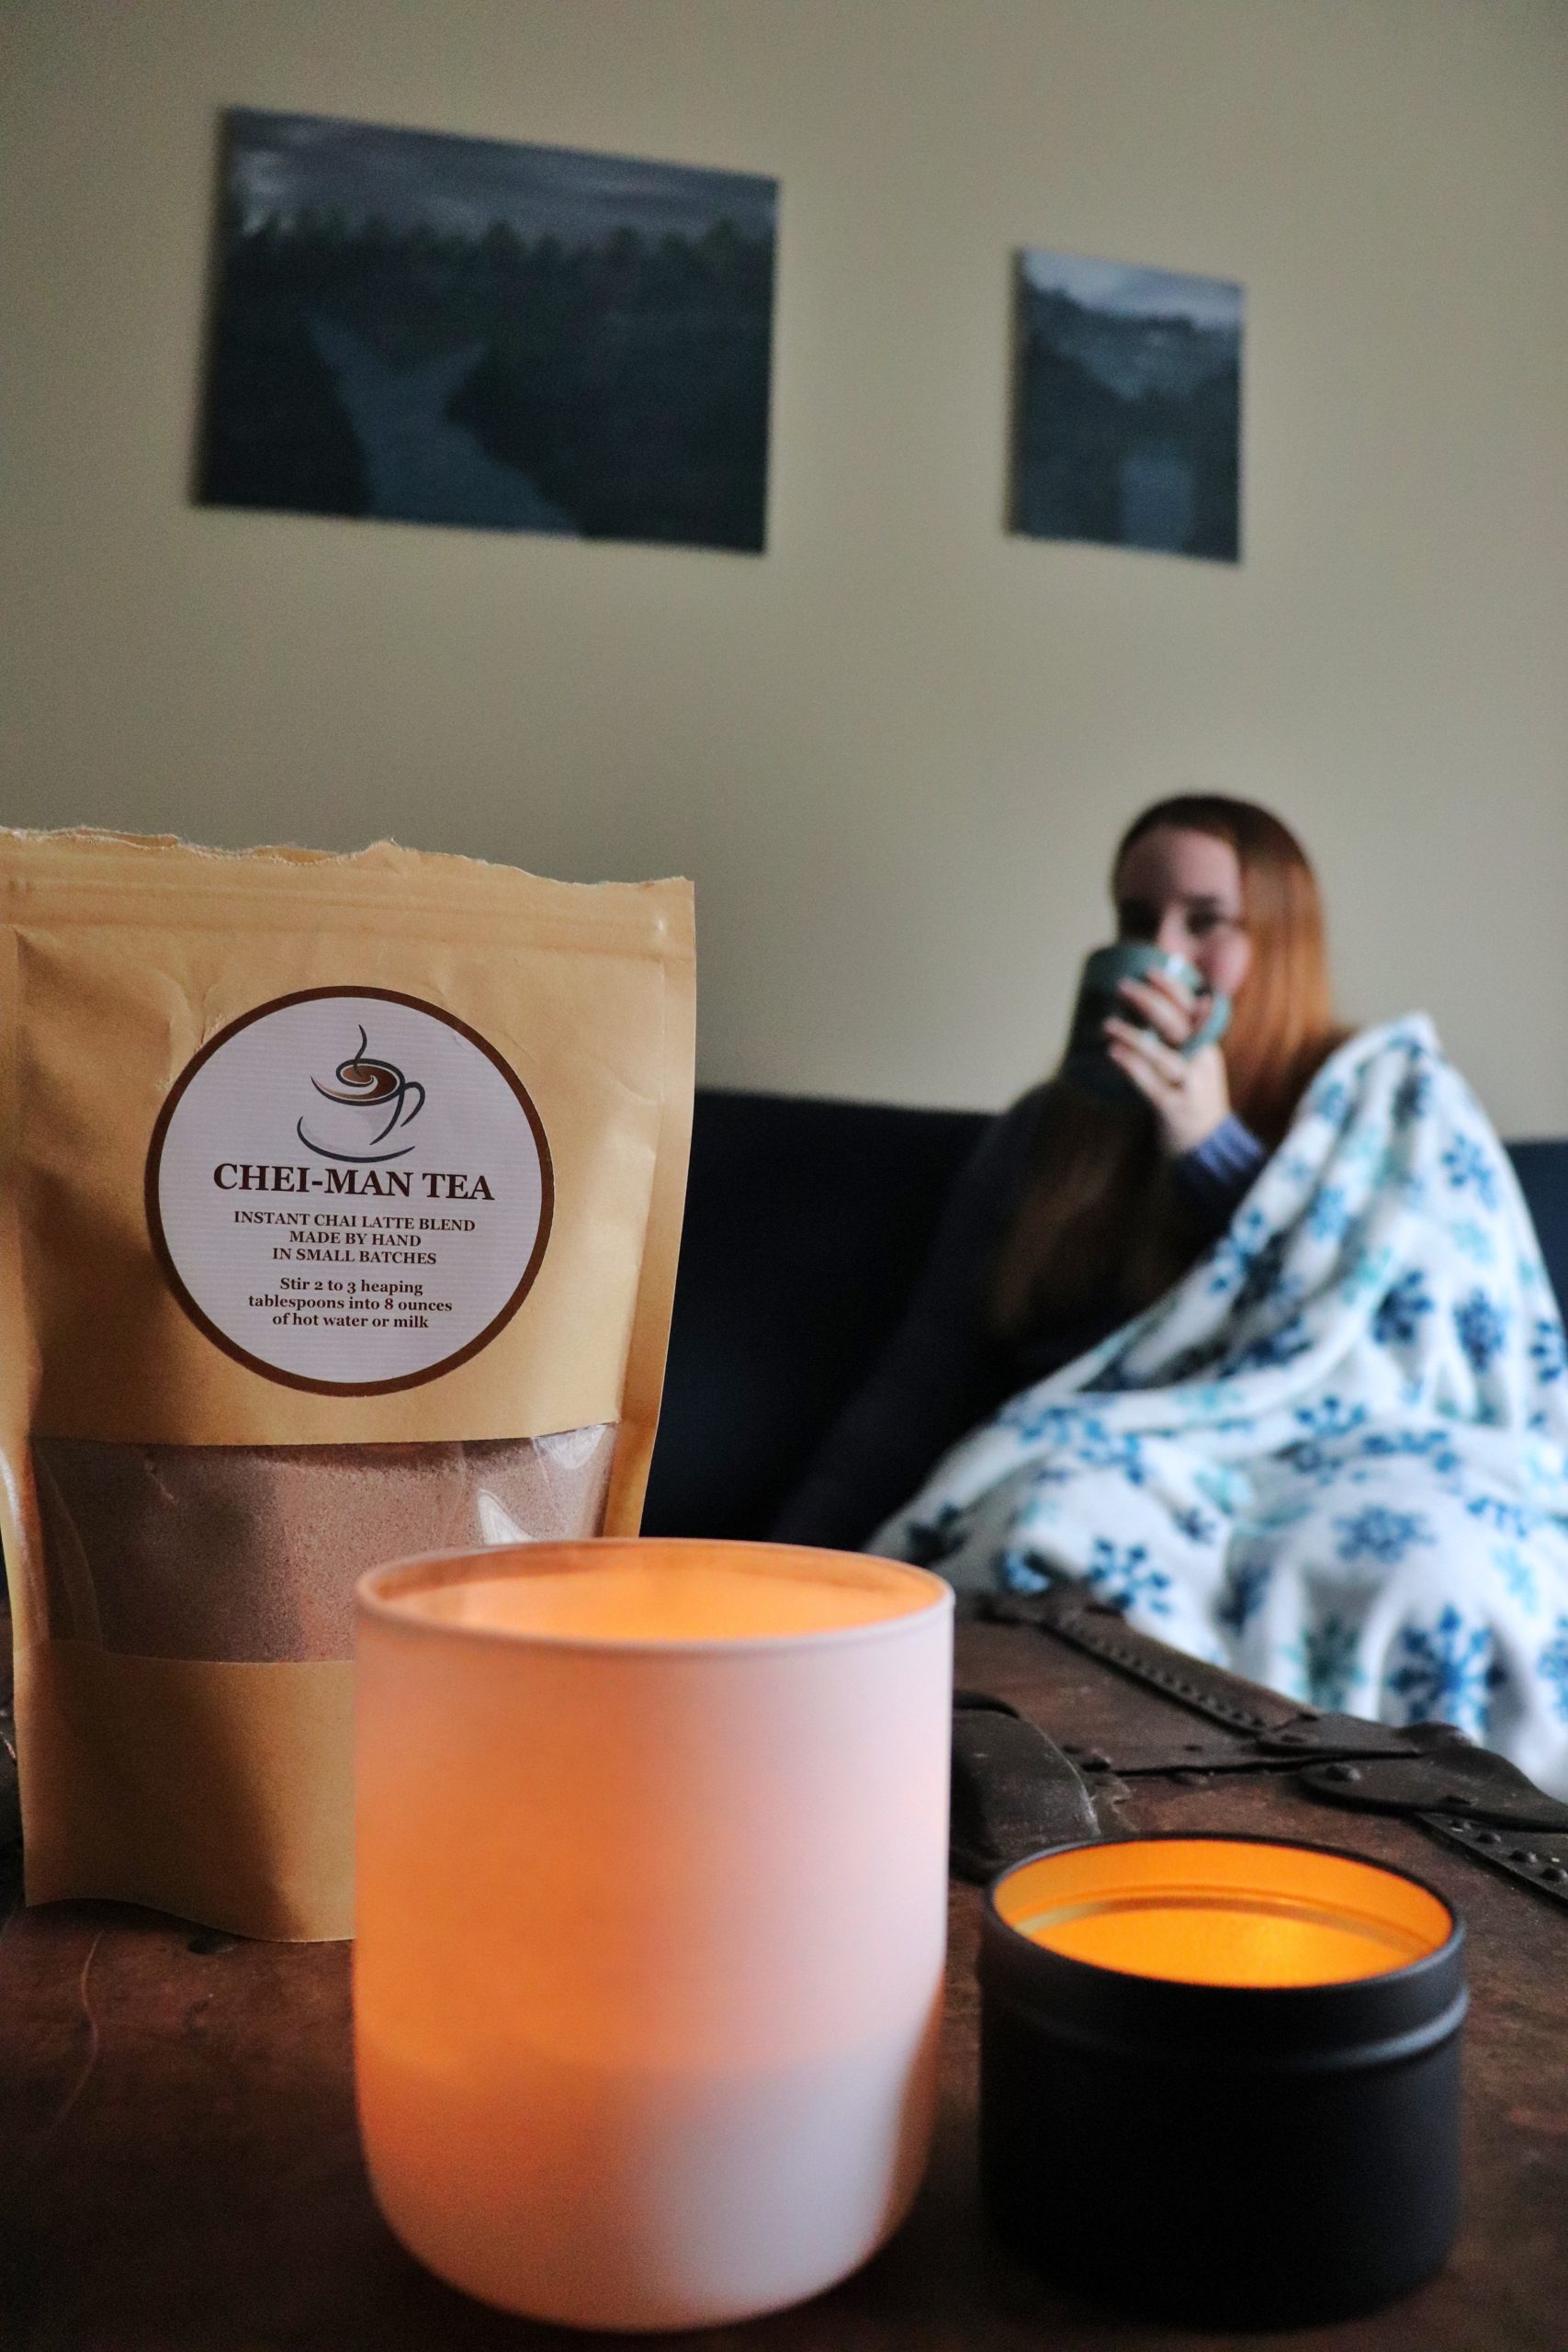 Try Chattanooga Chai with Cheiman Tea